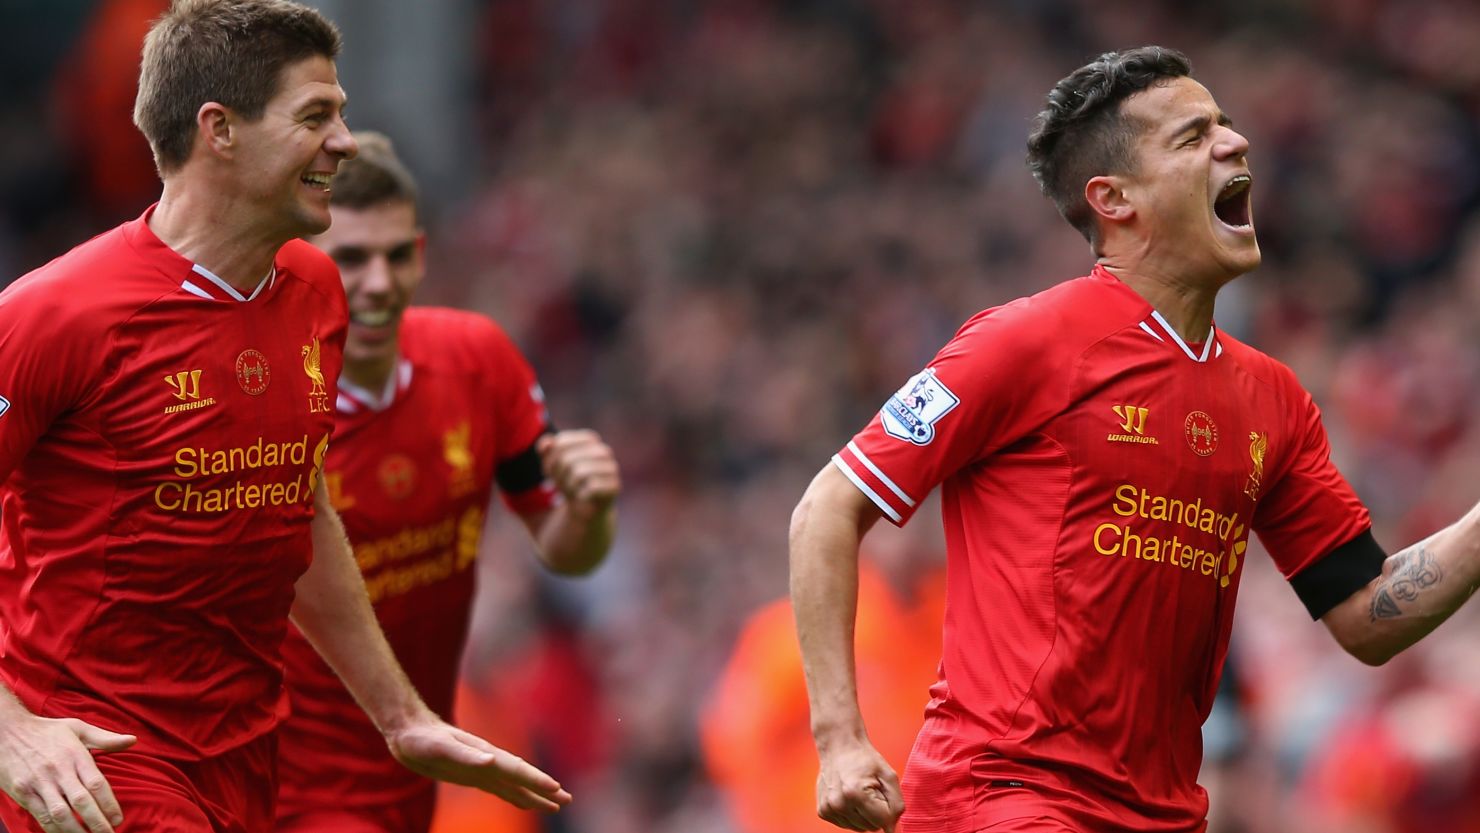 Philippe Coutinho celebrates his winning goal at Anfield with skipper Steven Gerrard.